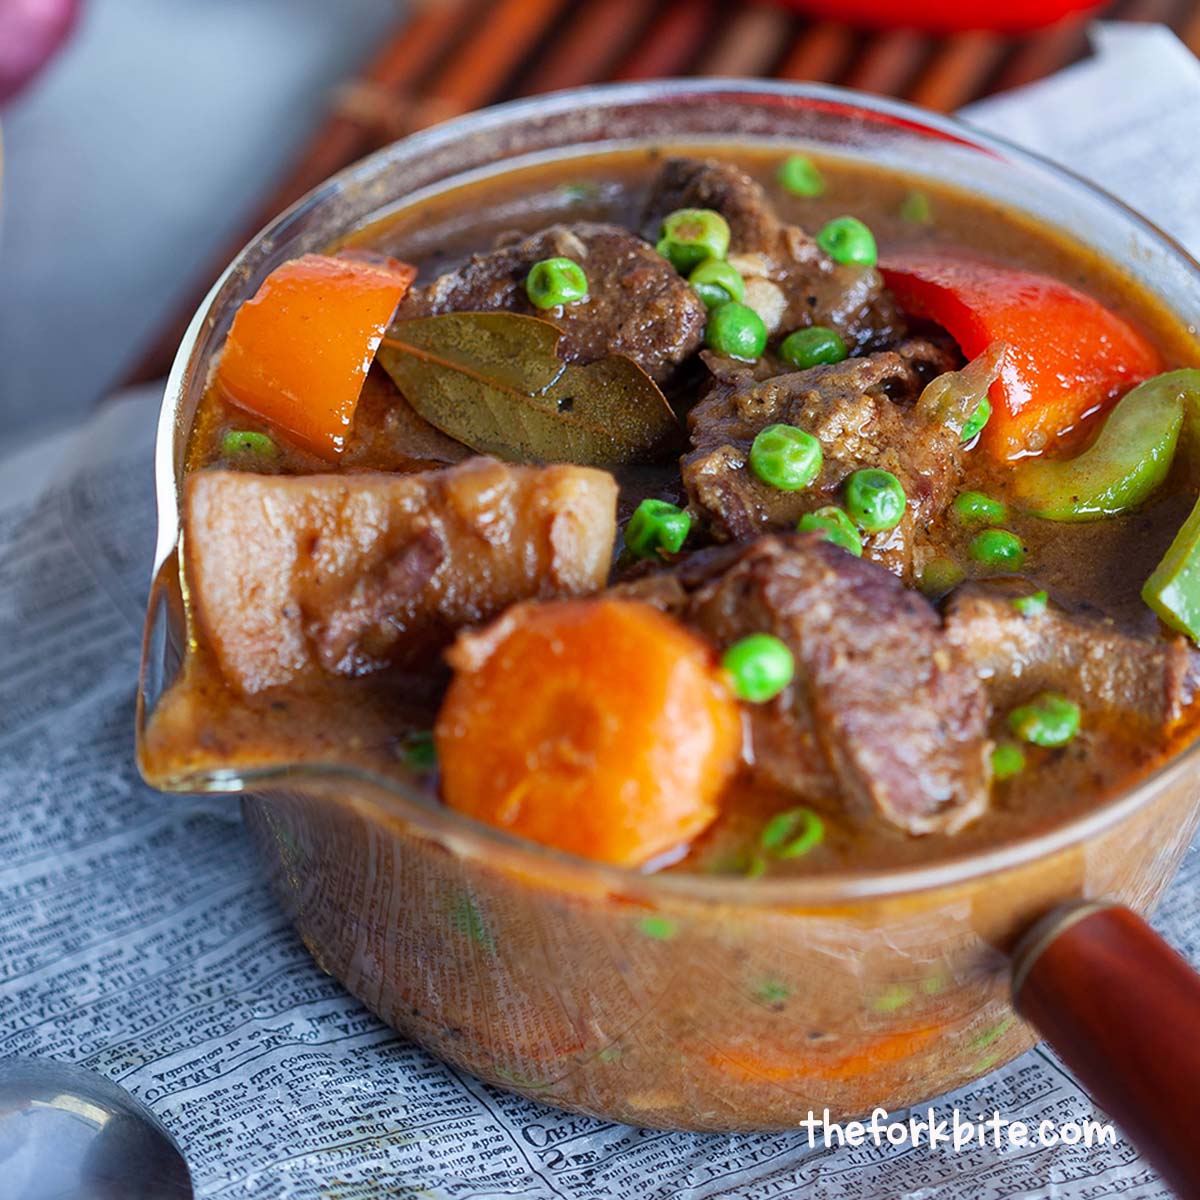 Having a bowl of juicy pieces of beef and tender vegetables immersed in a thick gravy can relive your day’s stresses. Autumn is just around the corner.